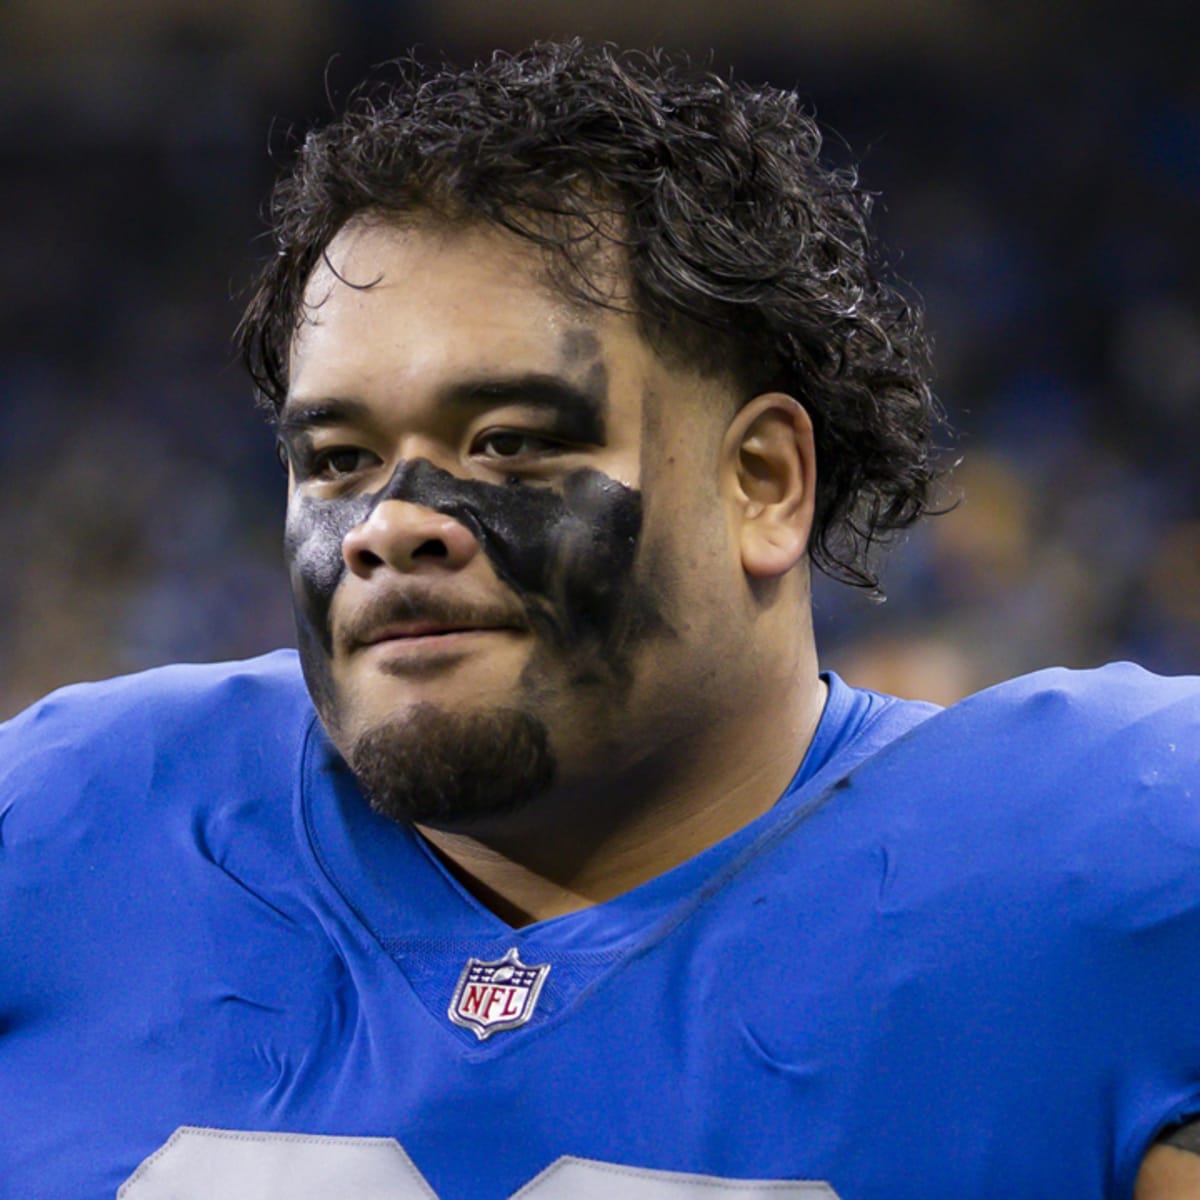 Who are the Top 3 #Lions players right now? PFF may surprise. Levi still  not ready and more.